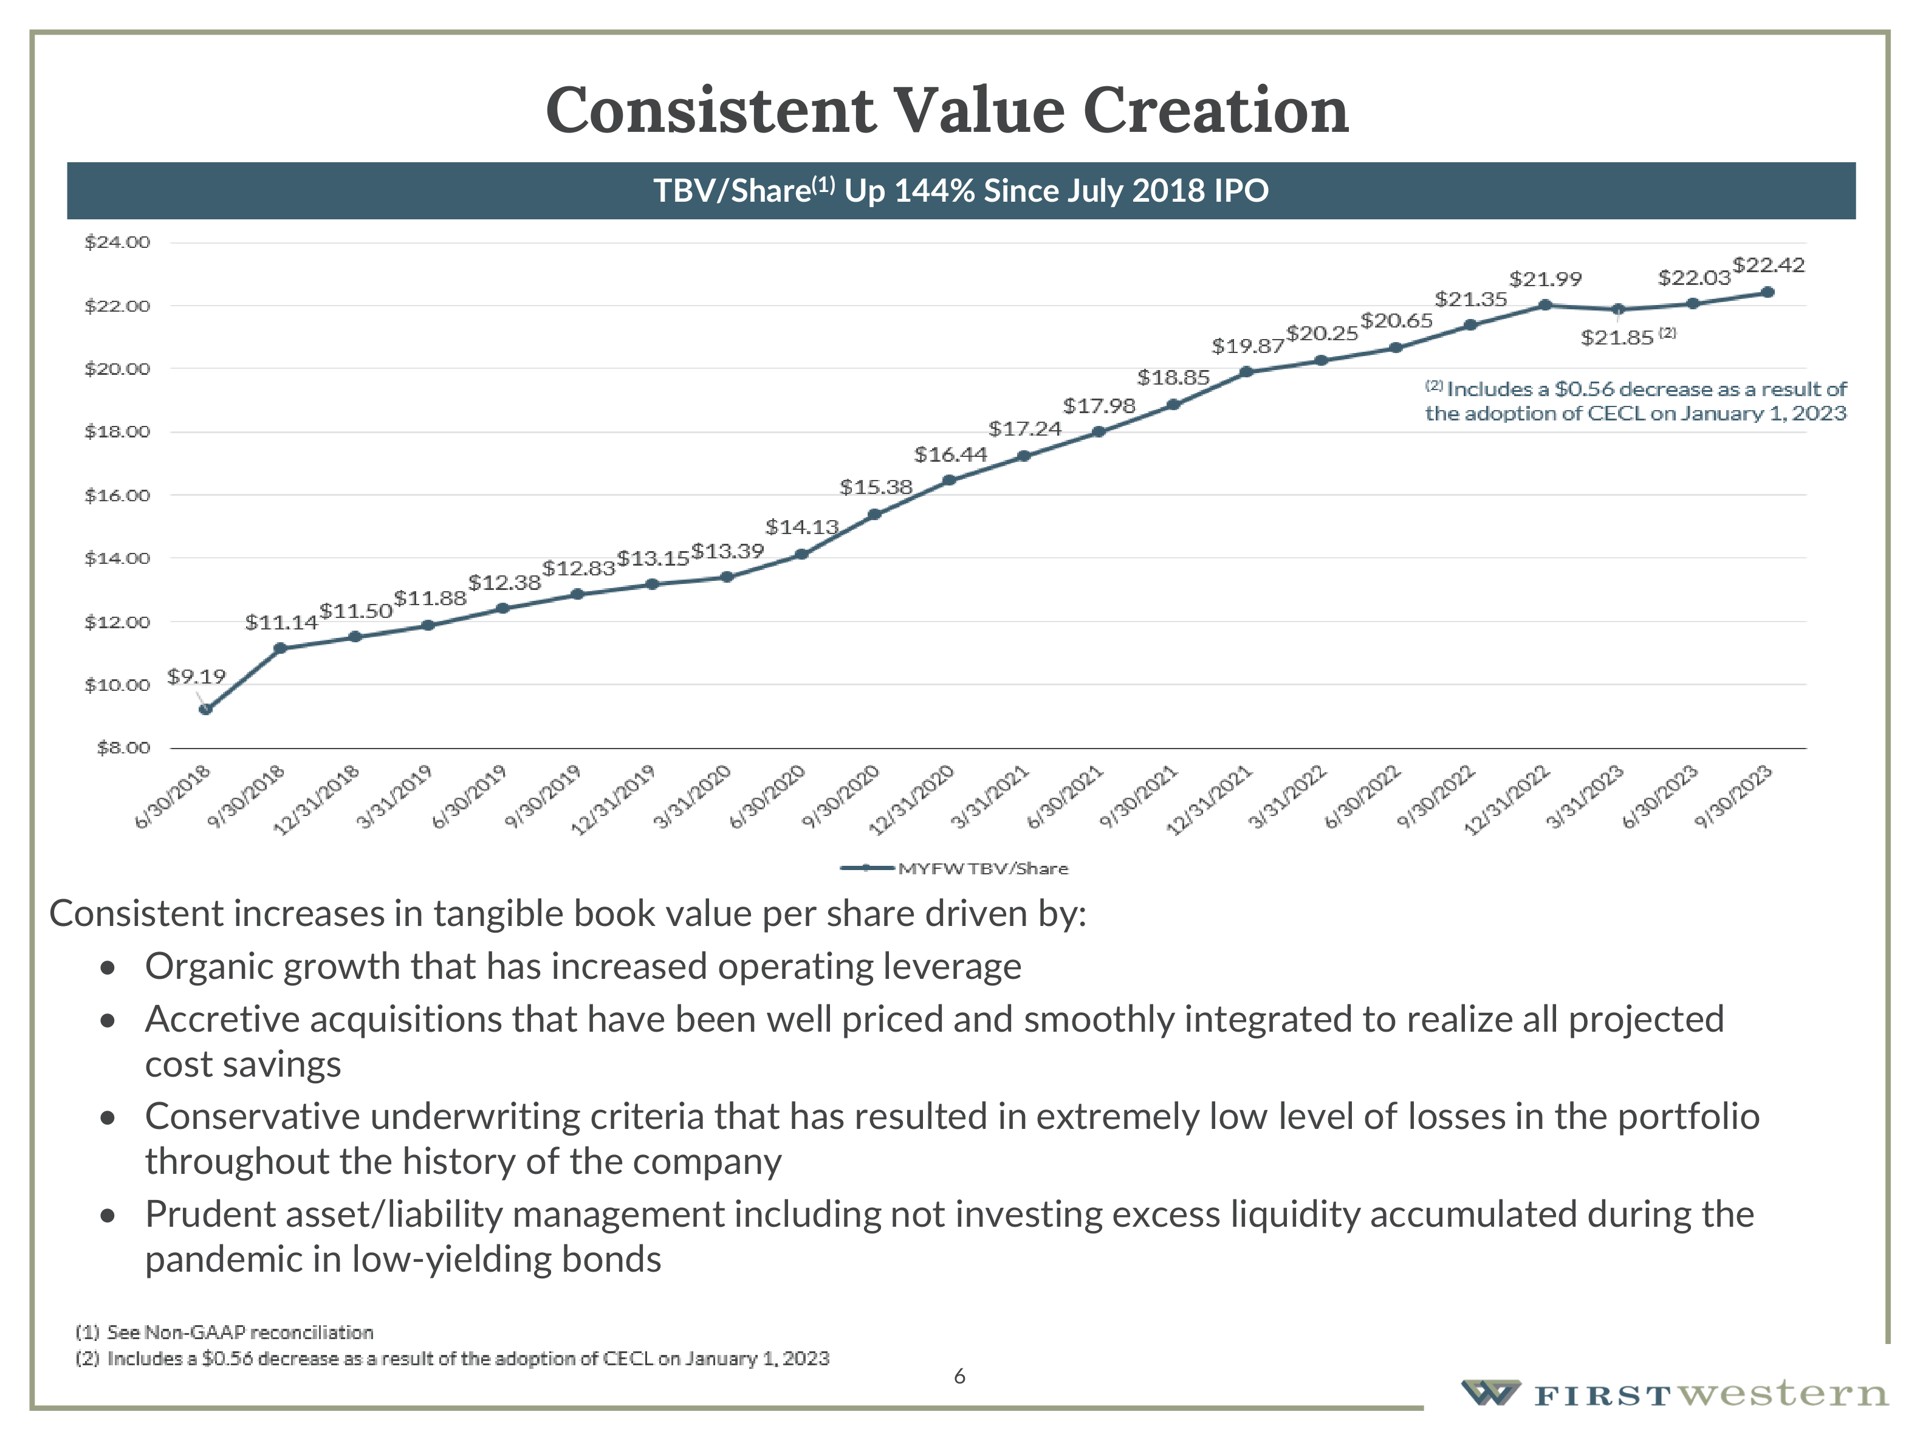 consistent value creation | First Western Financial